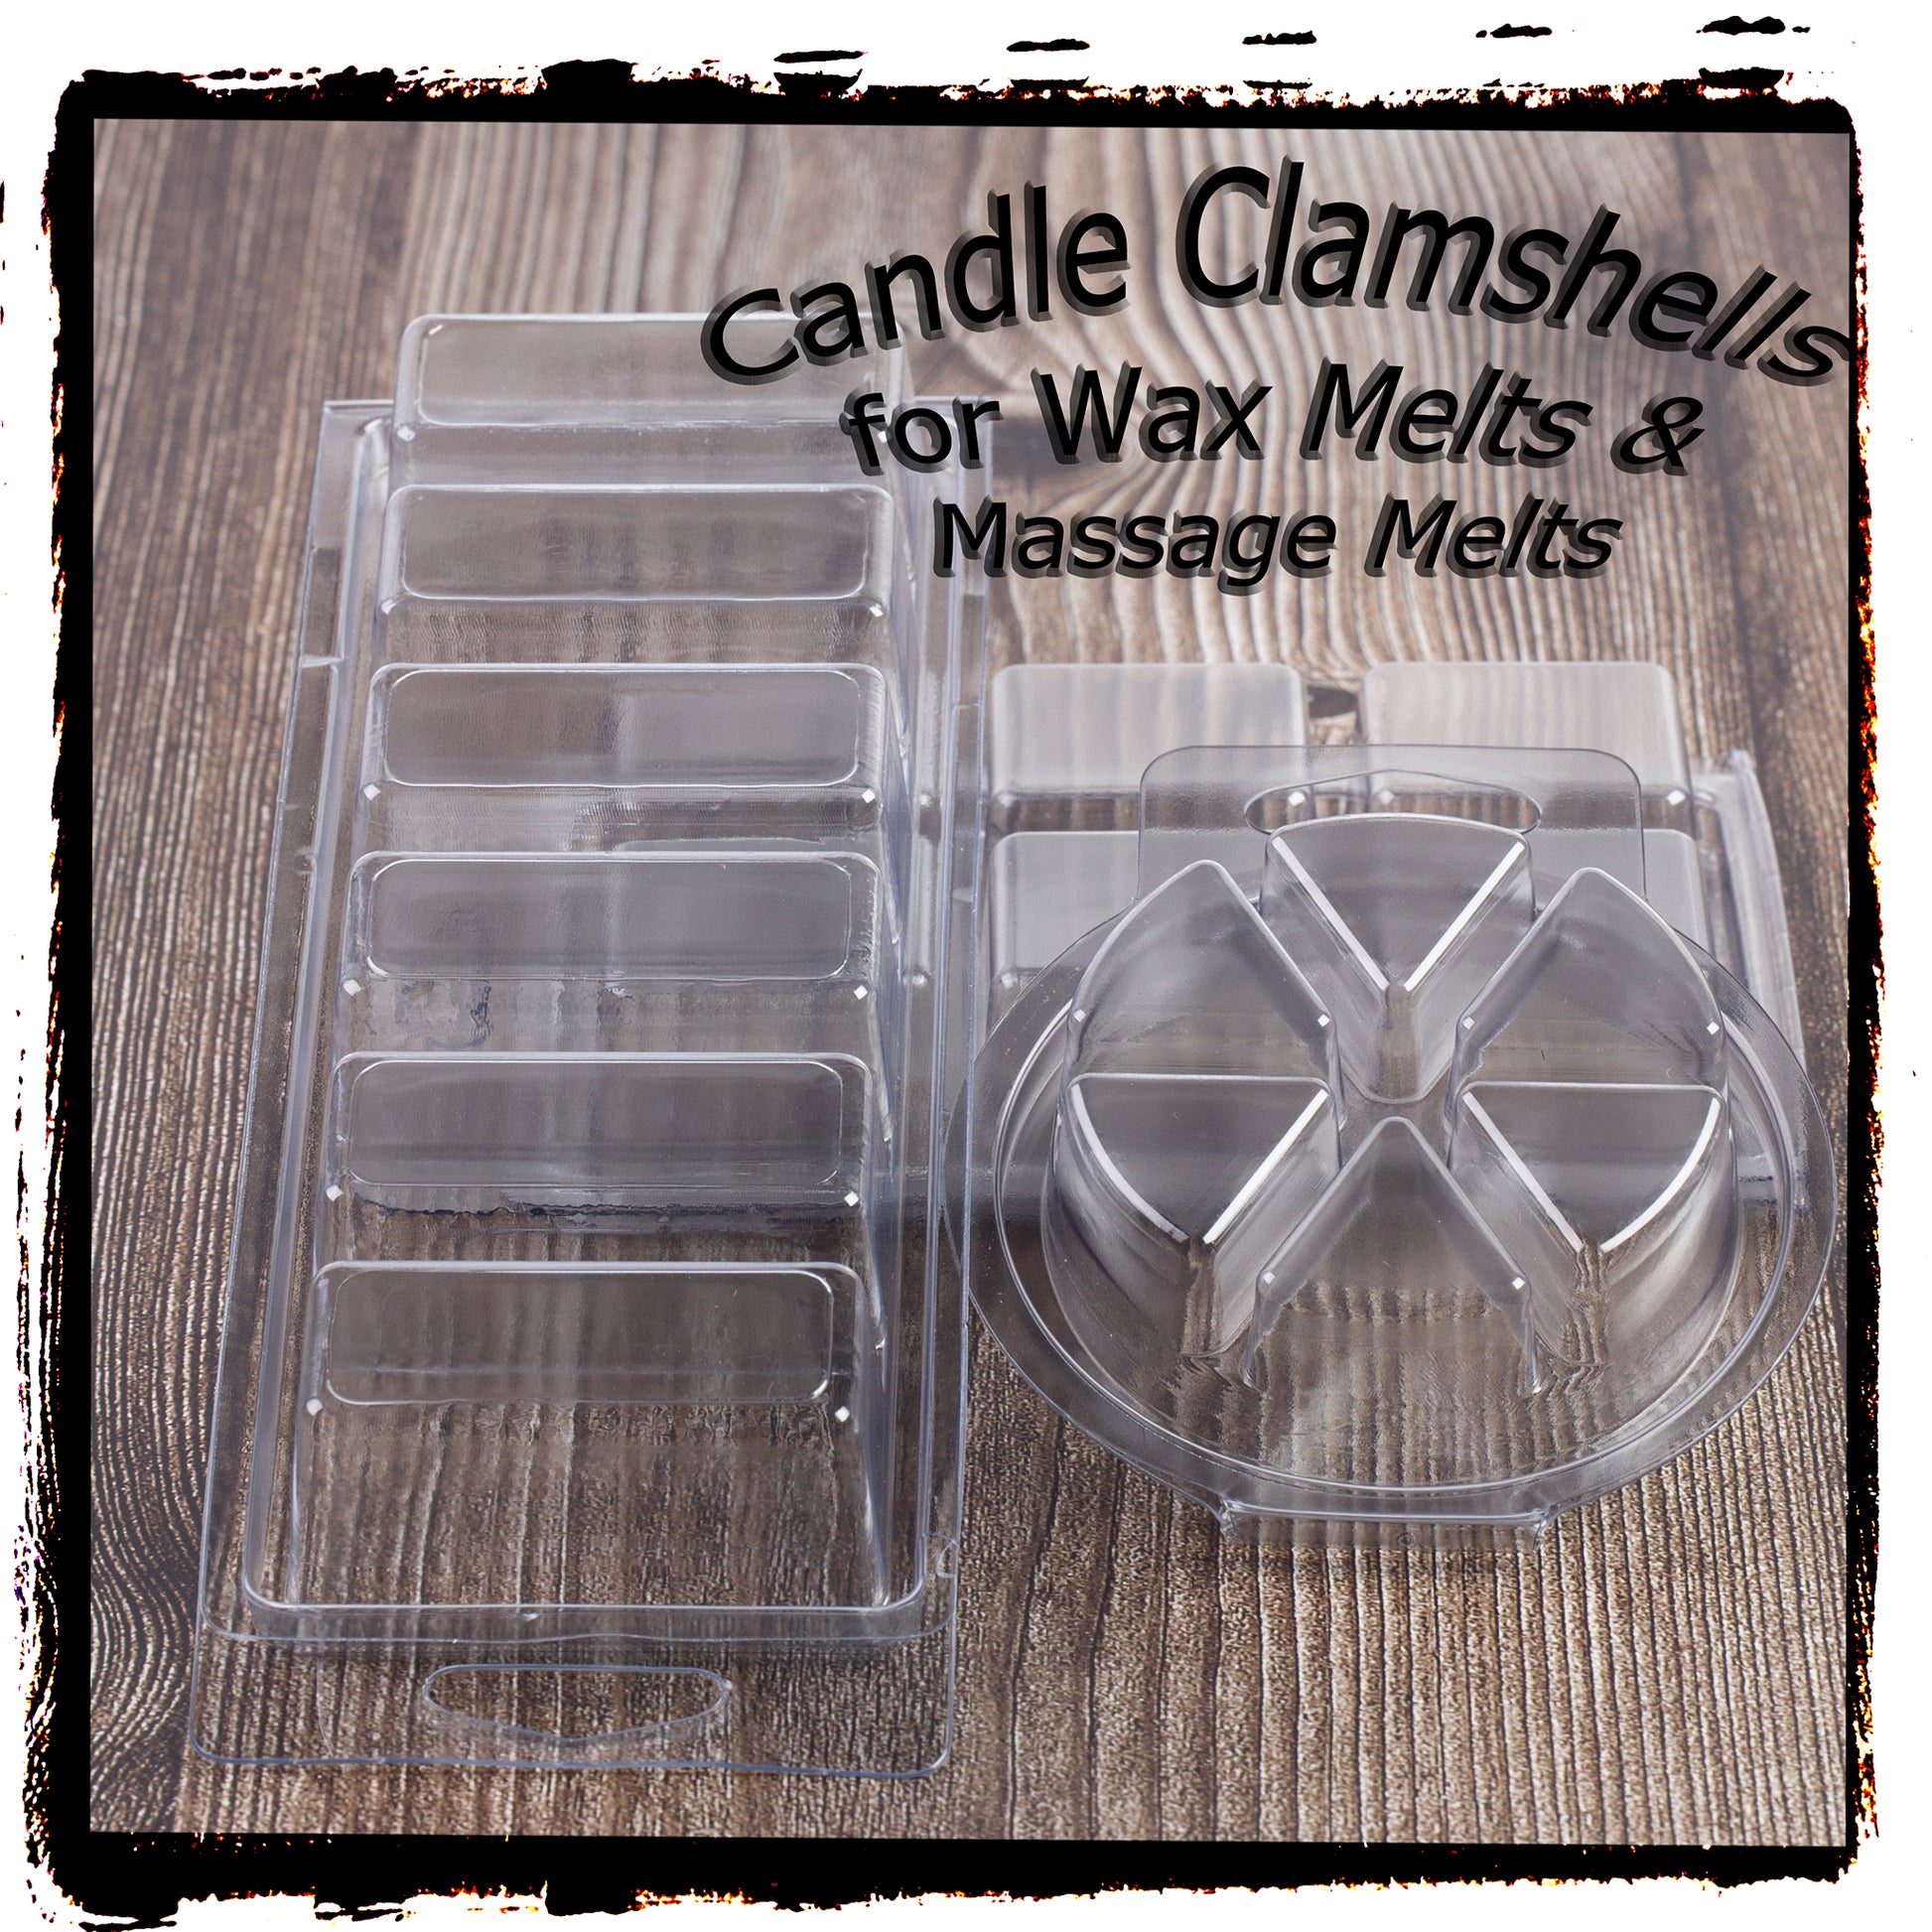 Candle Clamshells for Wax Melts